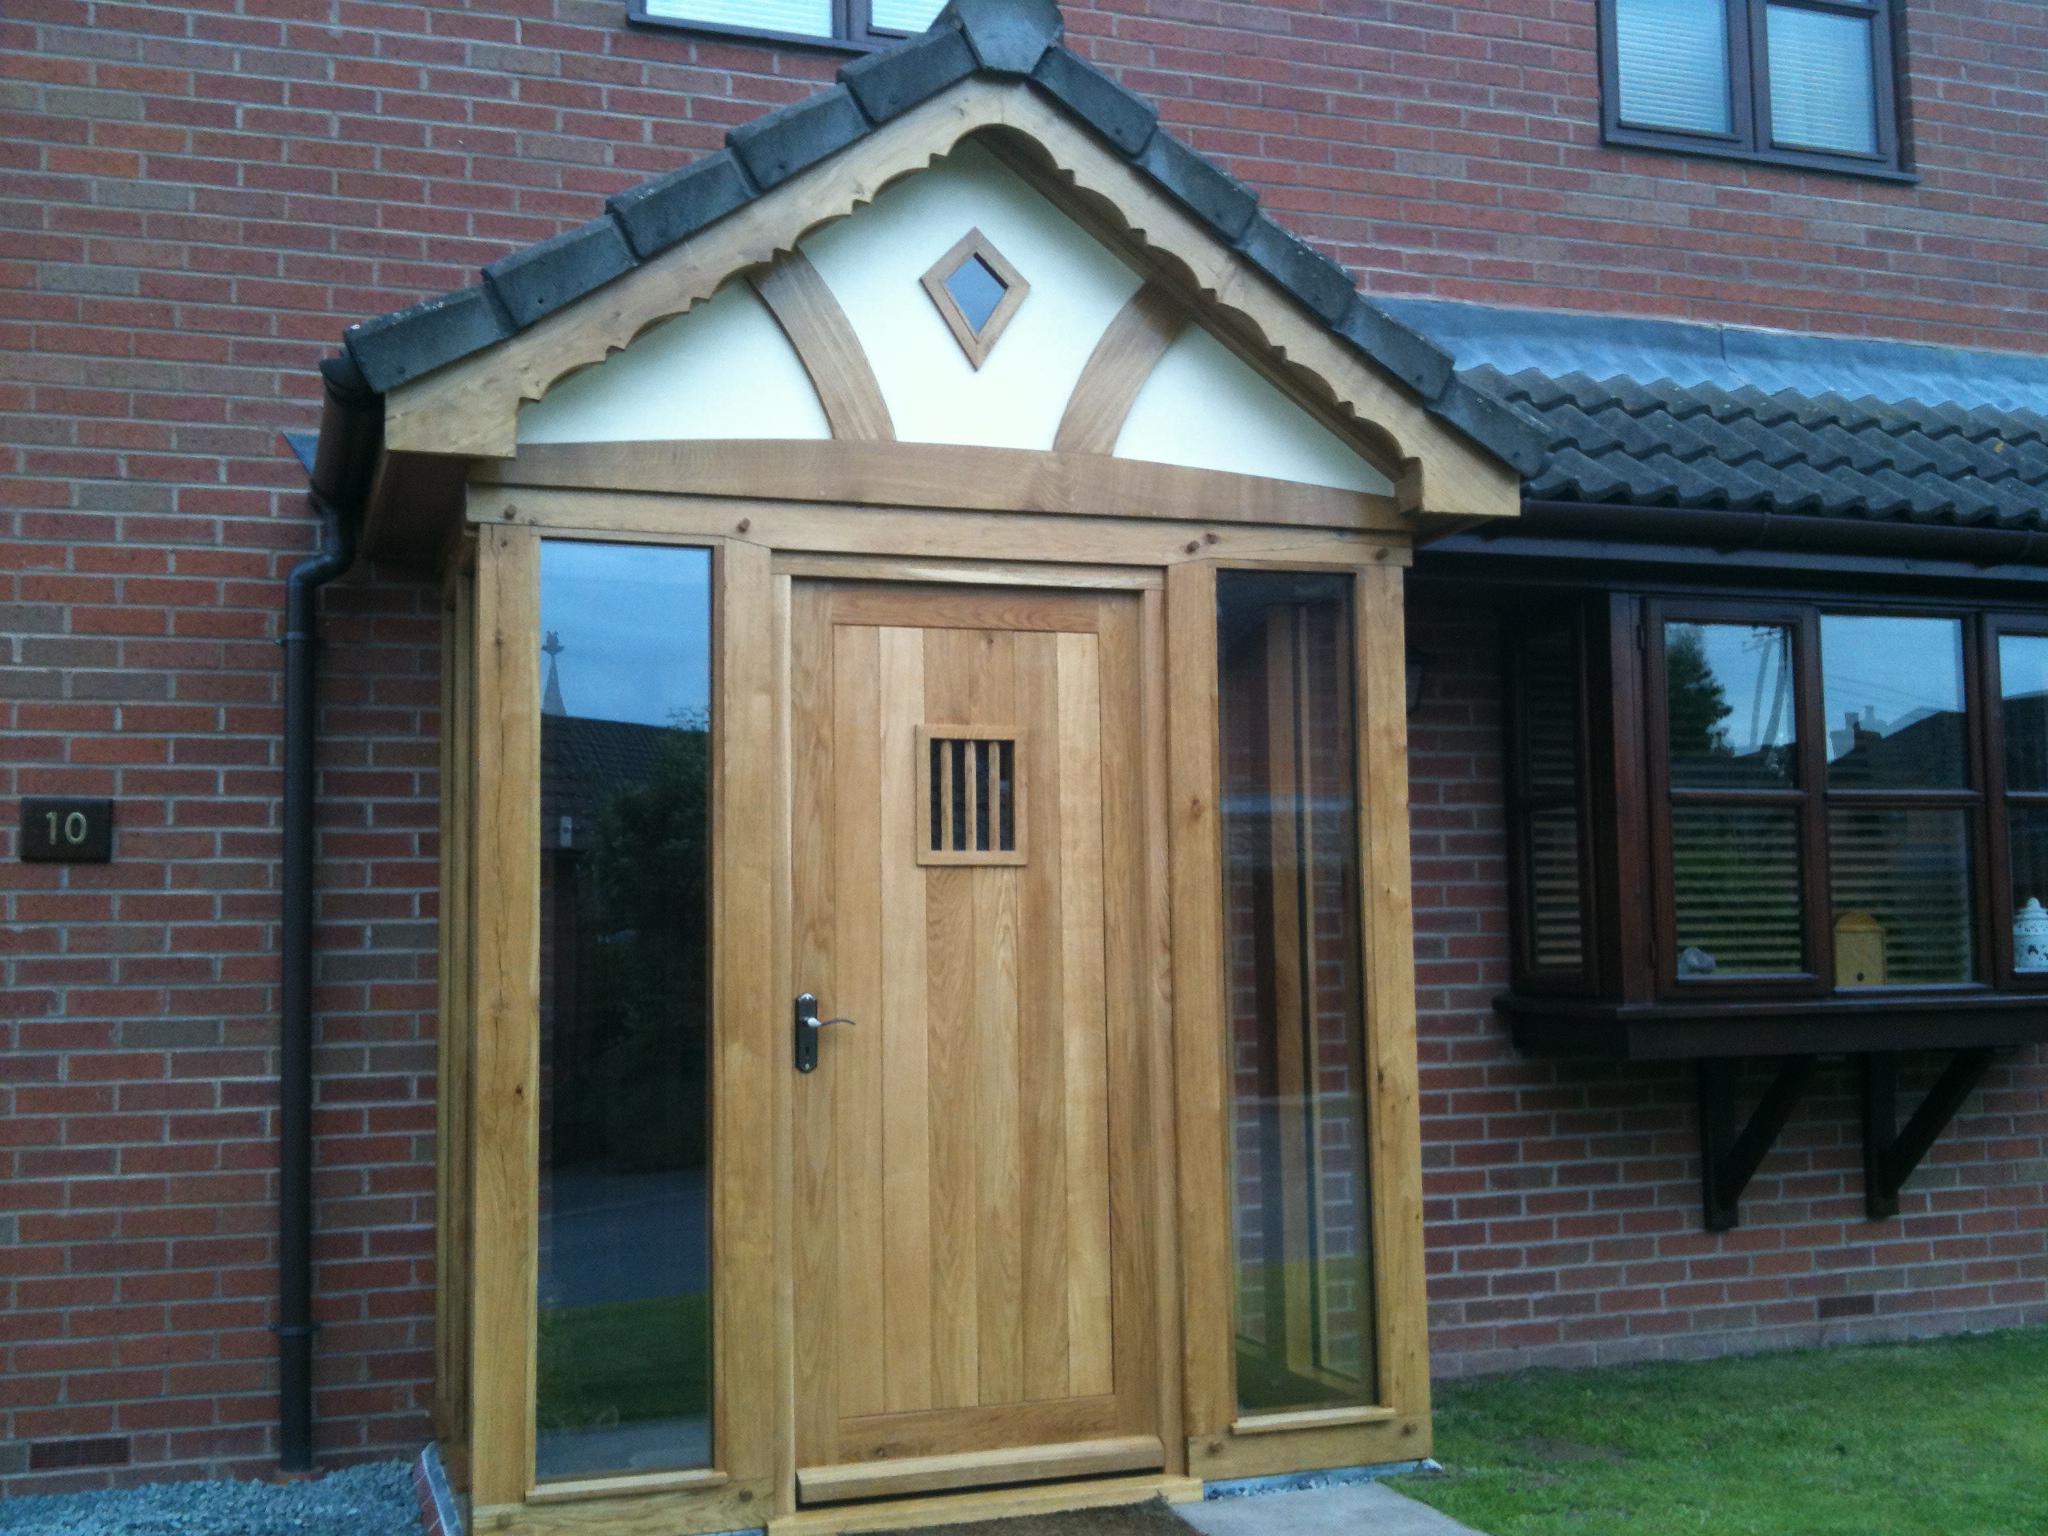 Enclosed oak framed porch with full length glass